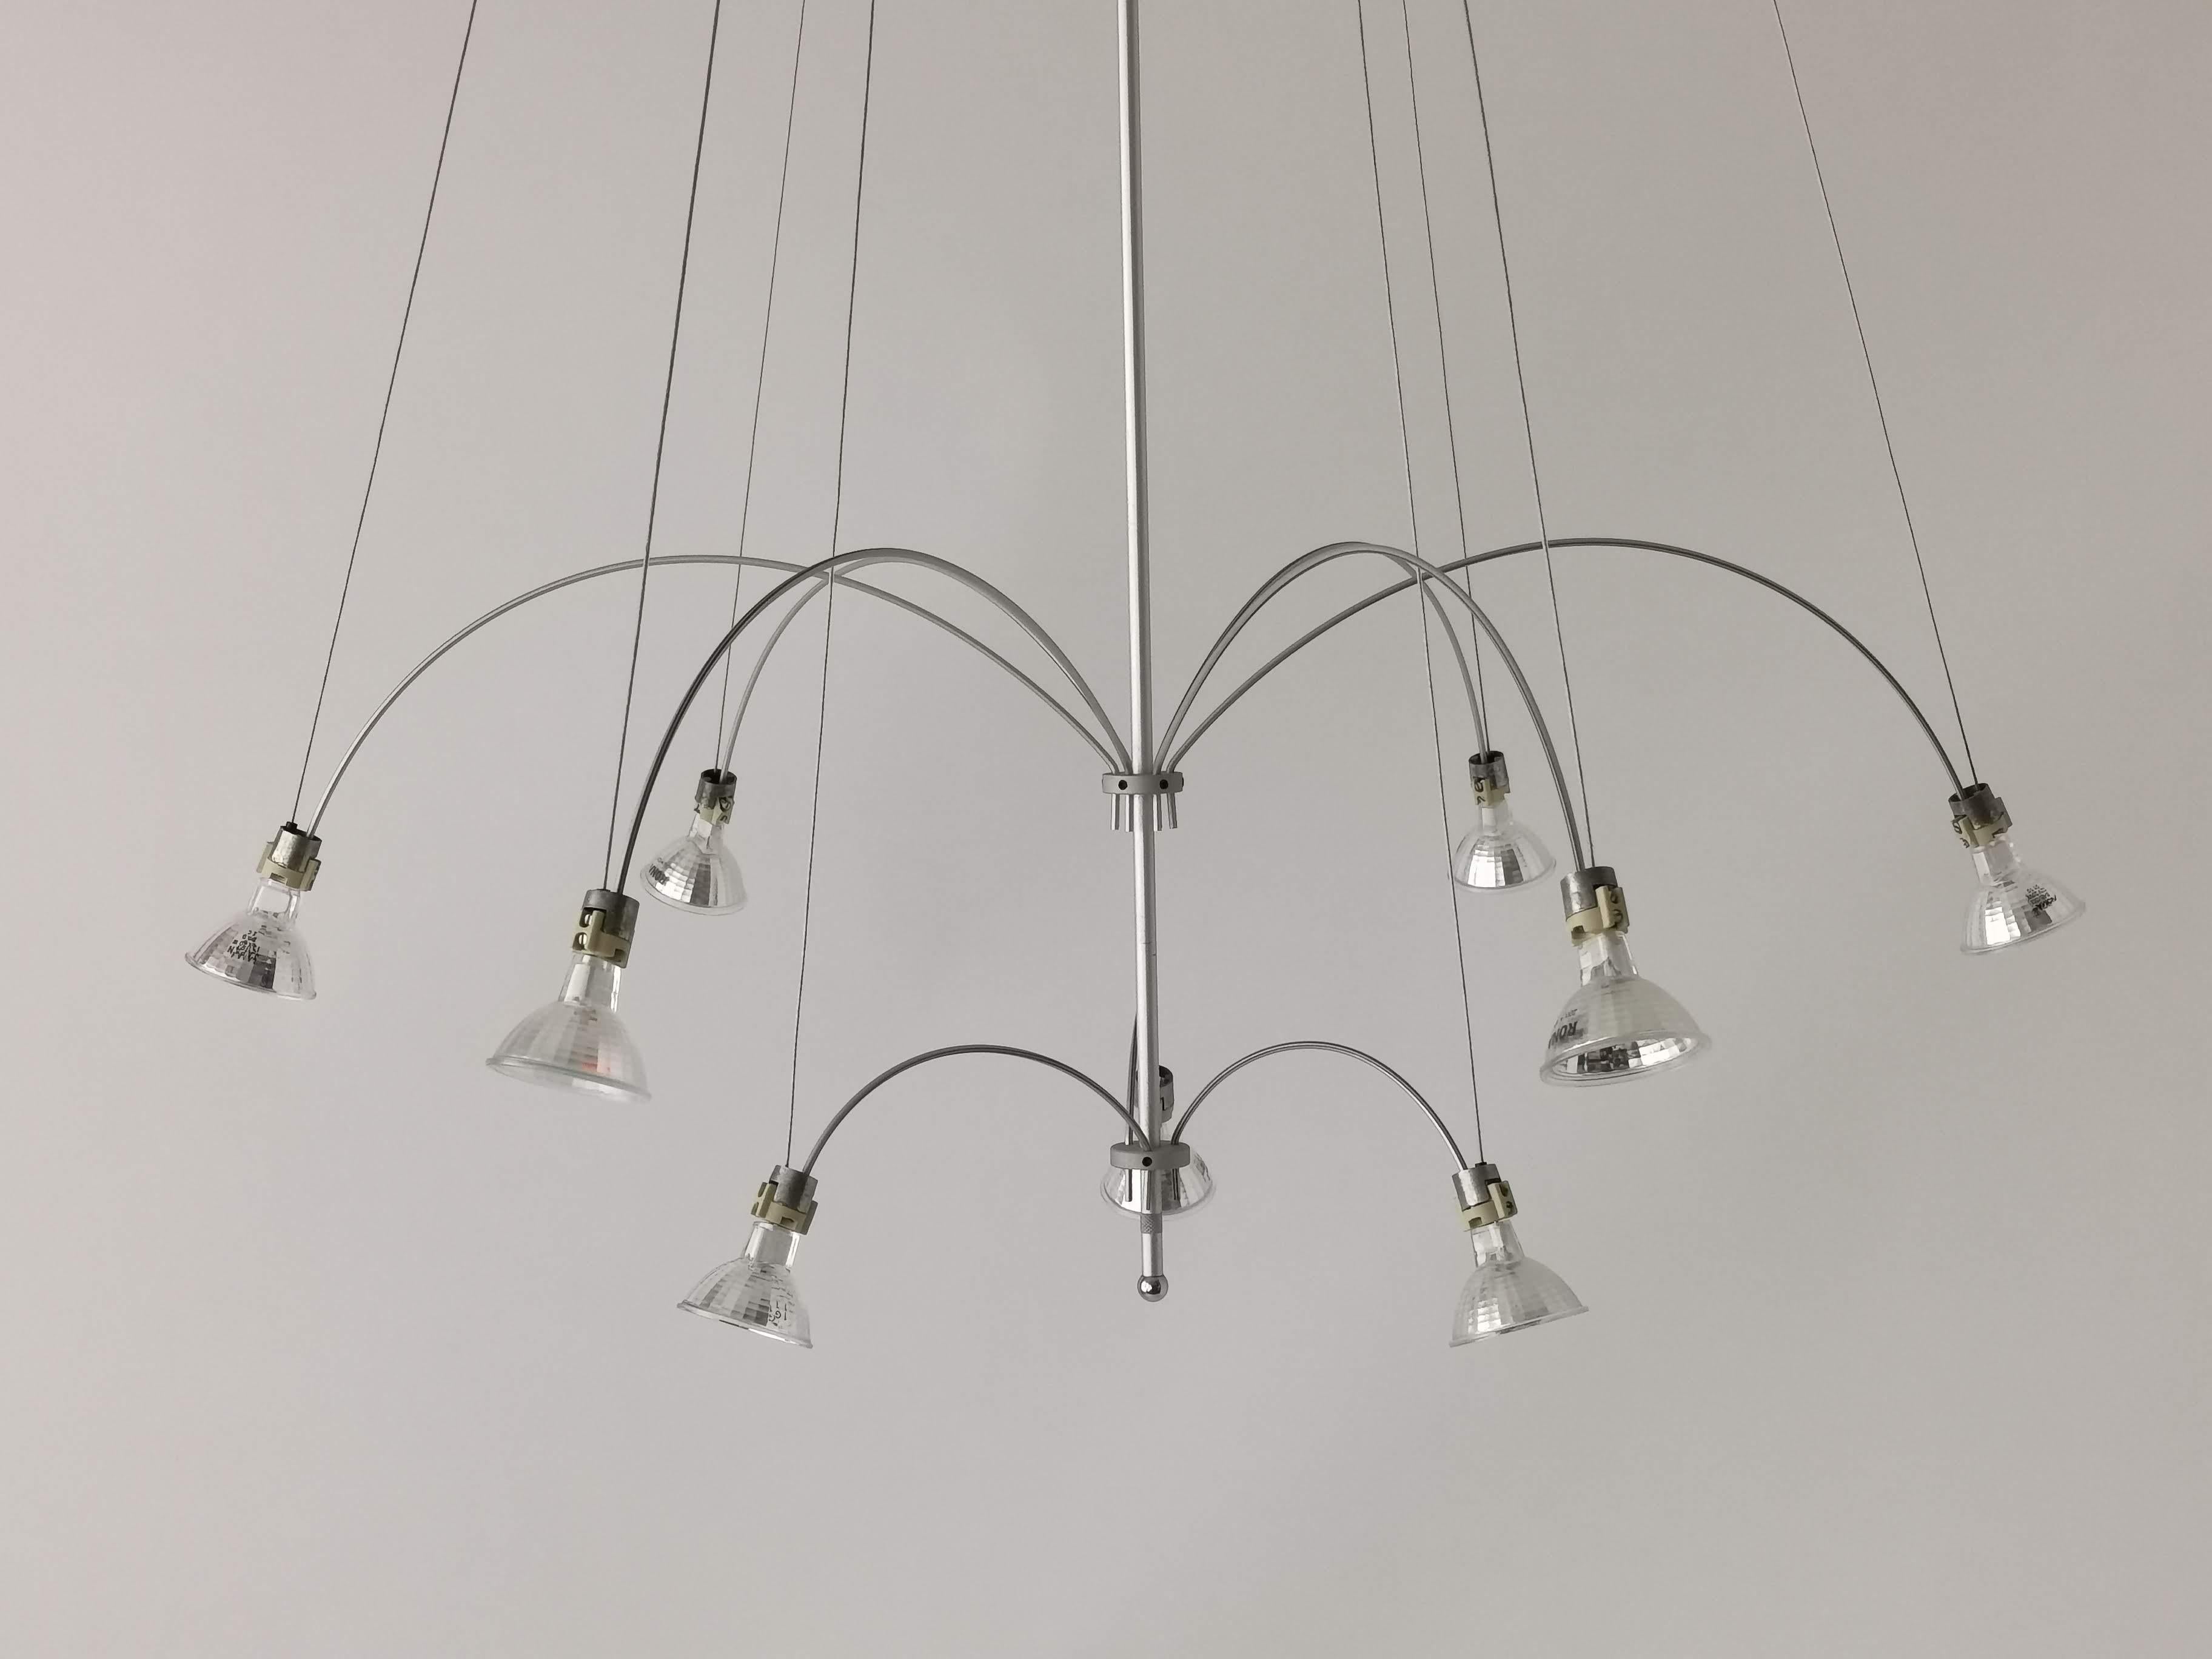 Anodized 1990s 'Orione' Halogen Chandelier, Solzi Luce, Italy